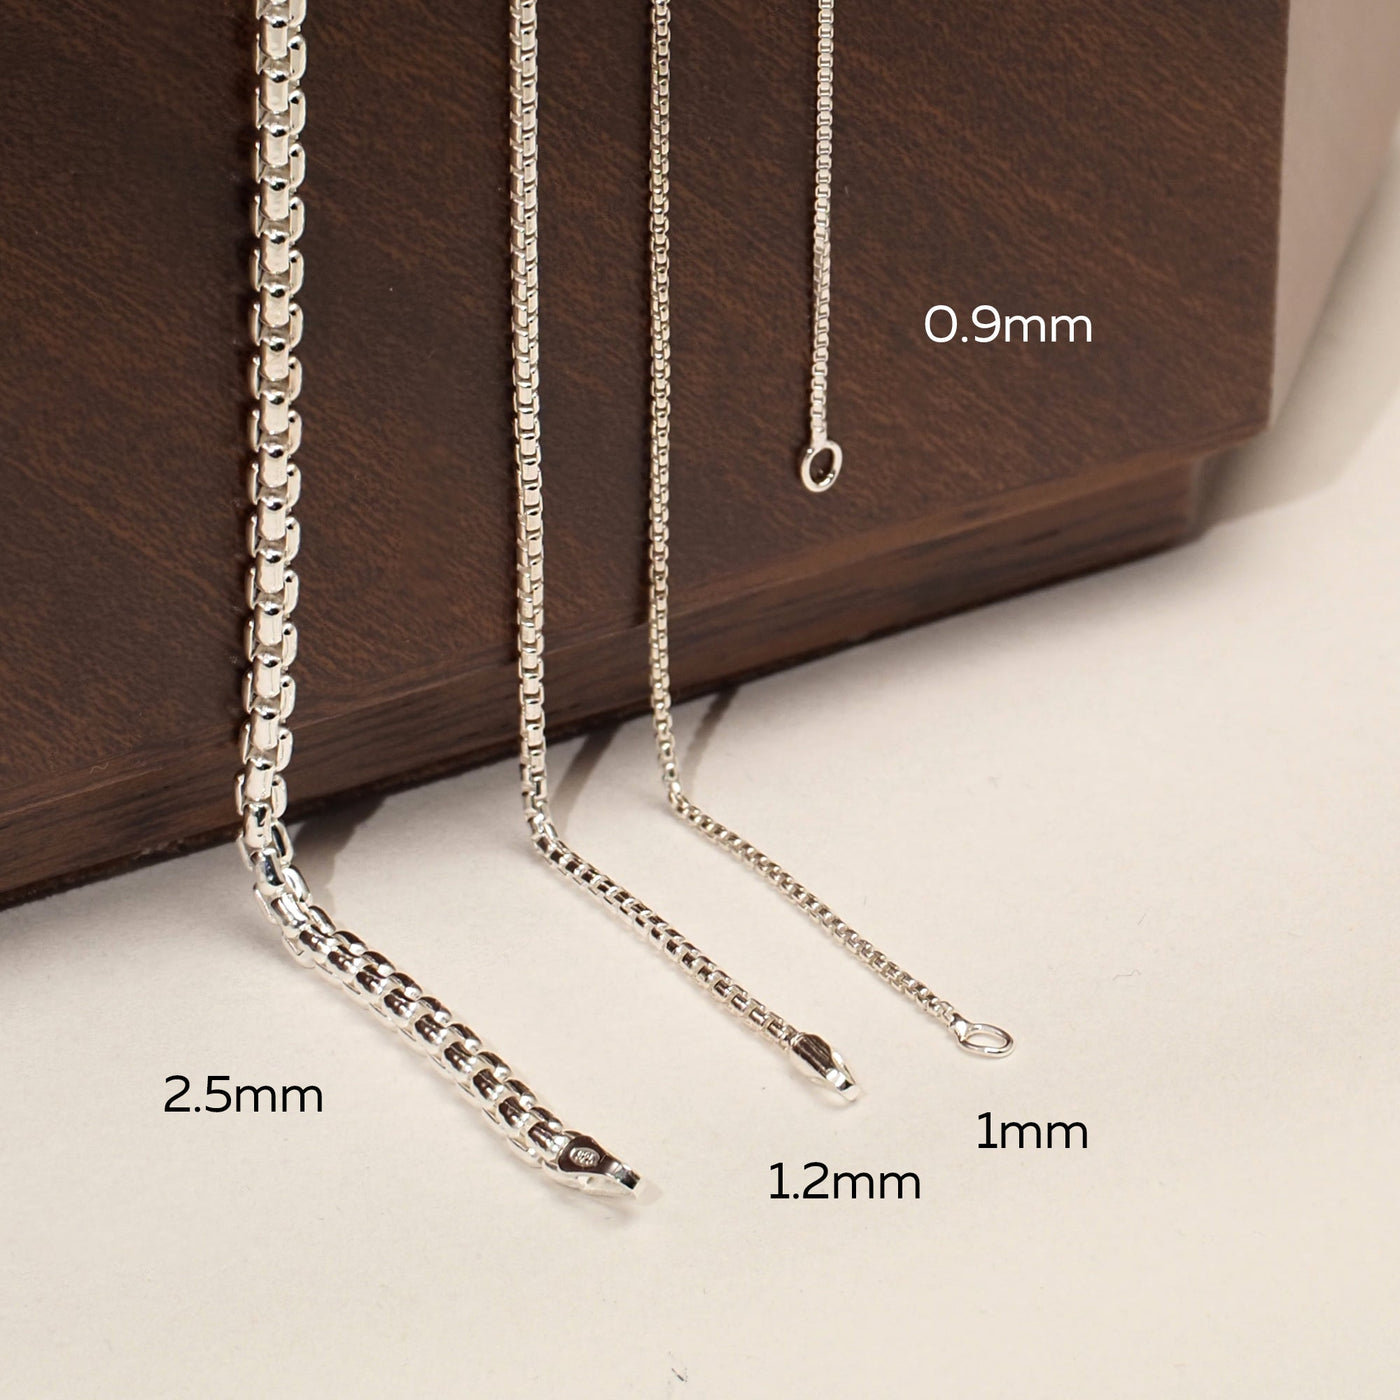 925 Sterling Silver Necklace (2.5mm / 3mm) - 2.5mm - Necklace